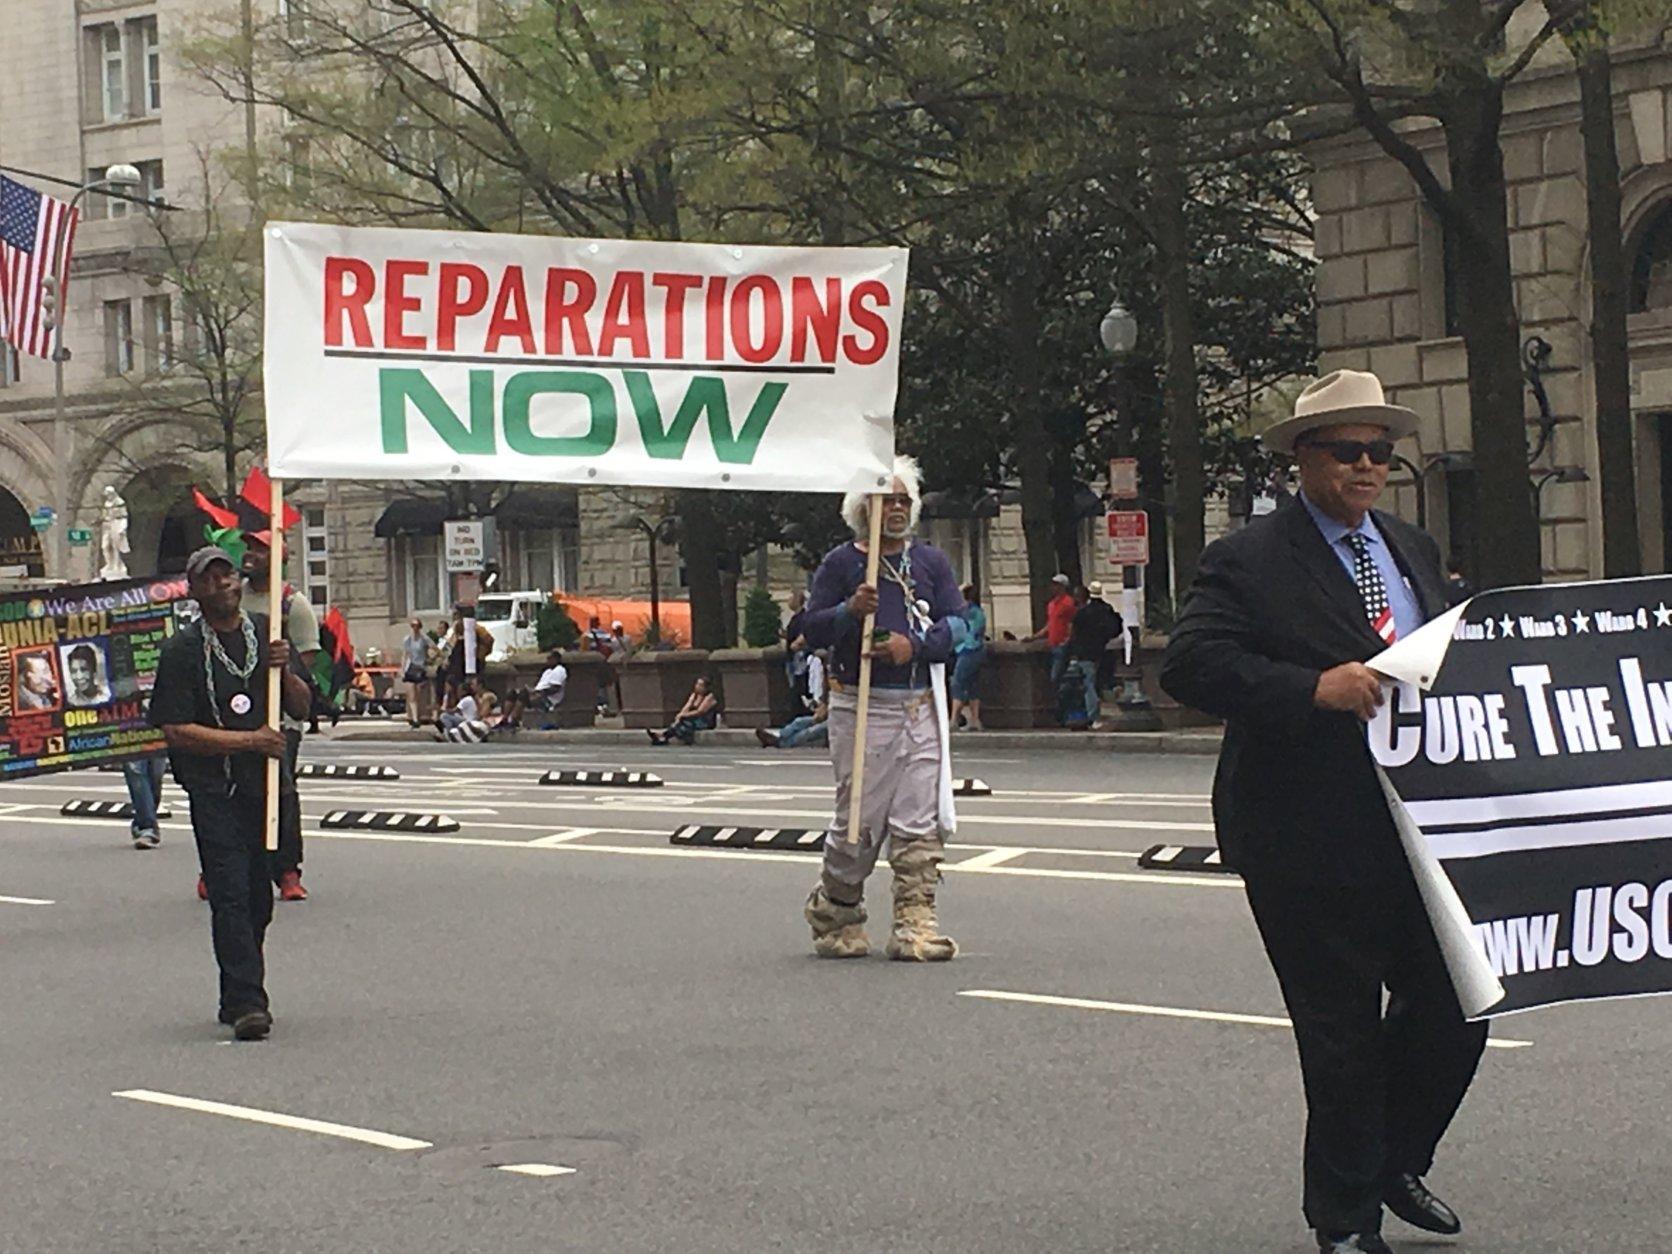 The Emancipation Day Parade takes place Saturday, April 13, 2019, in D.C. (WTOP/Rick Massimo)